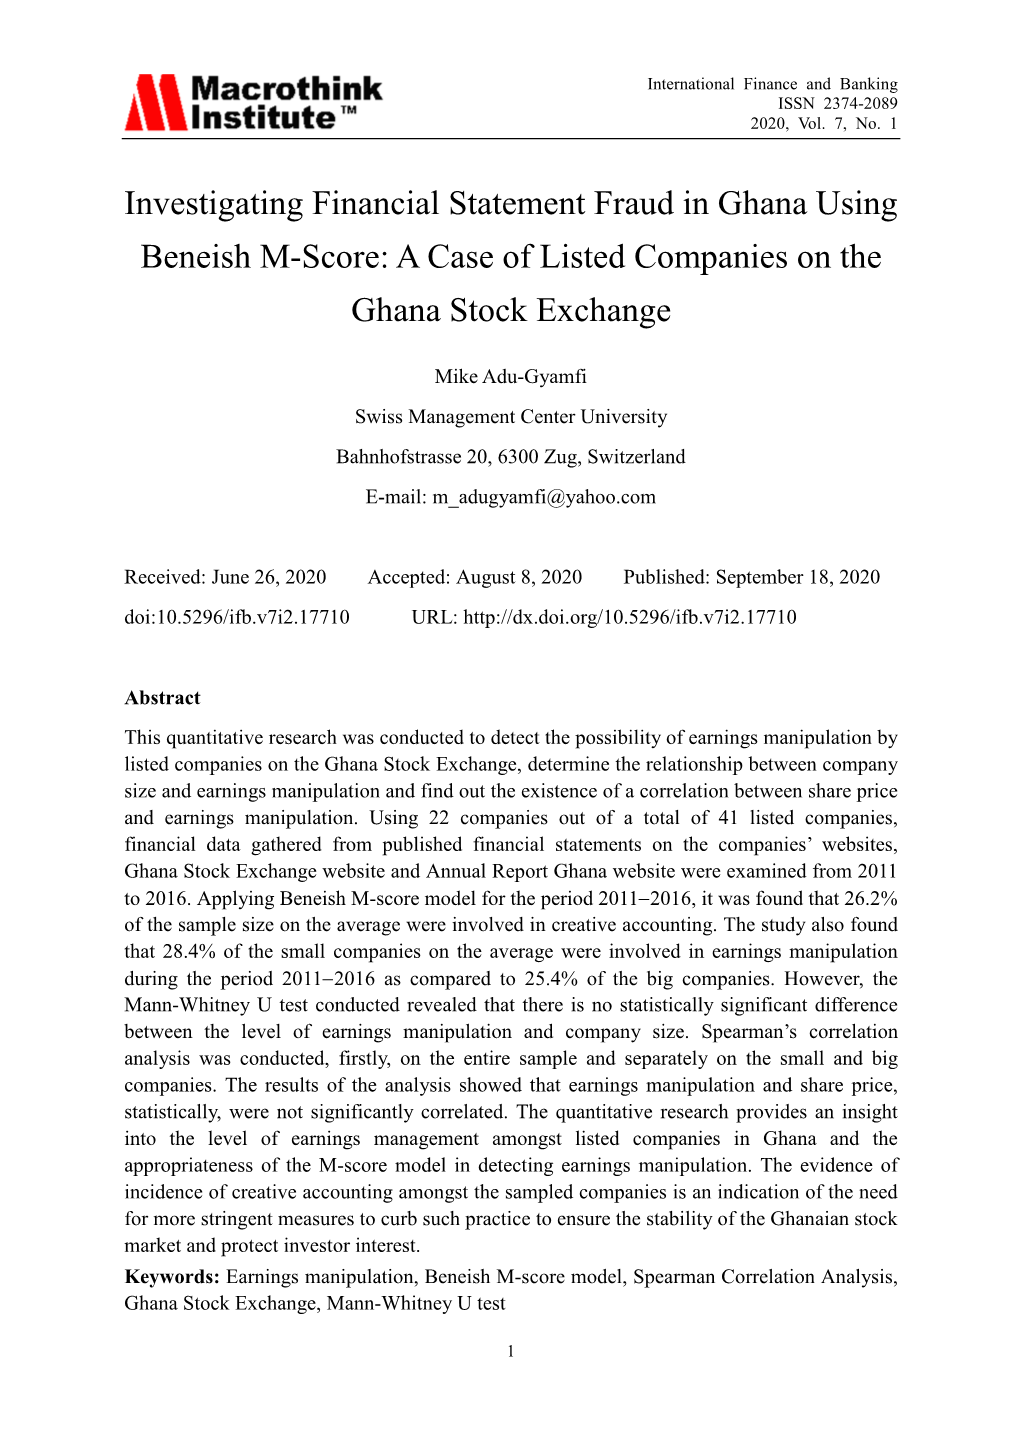 Investigating Financial Statement Fraud in Ghana Using Beneish M-Score: a Case of Listed Companies on the Ghana Stock Exchange